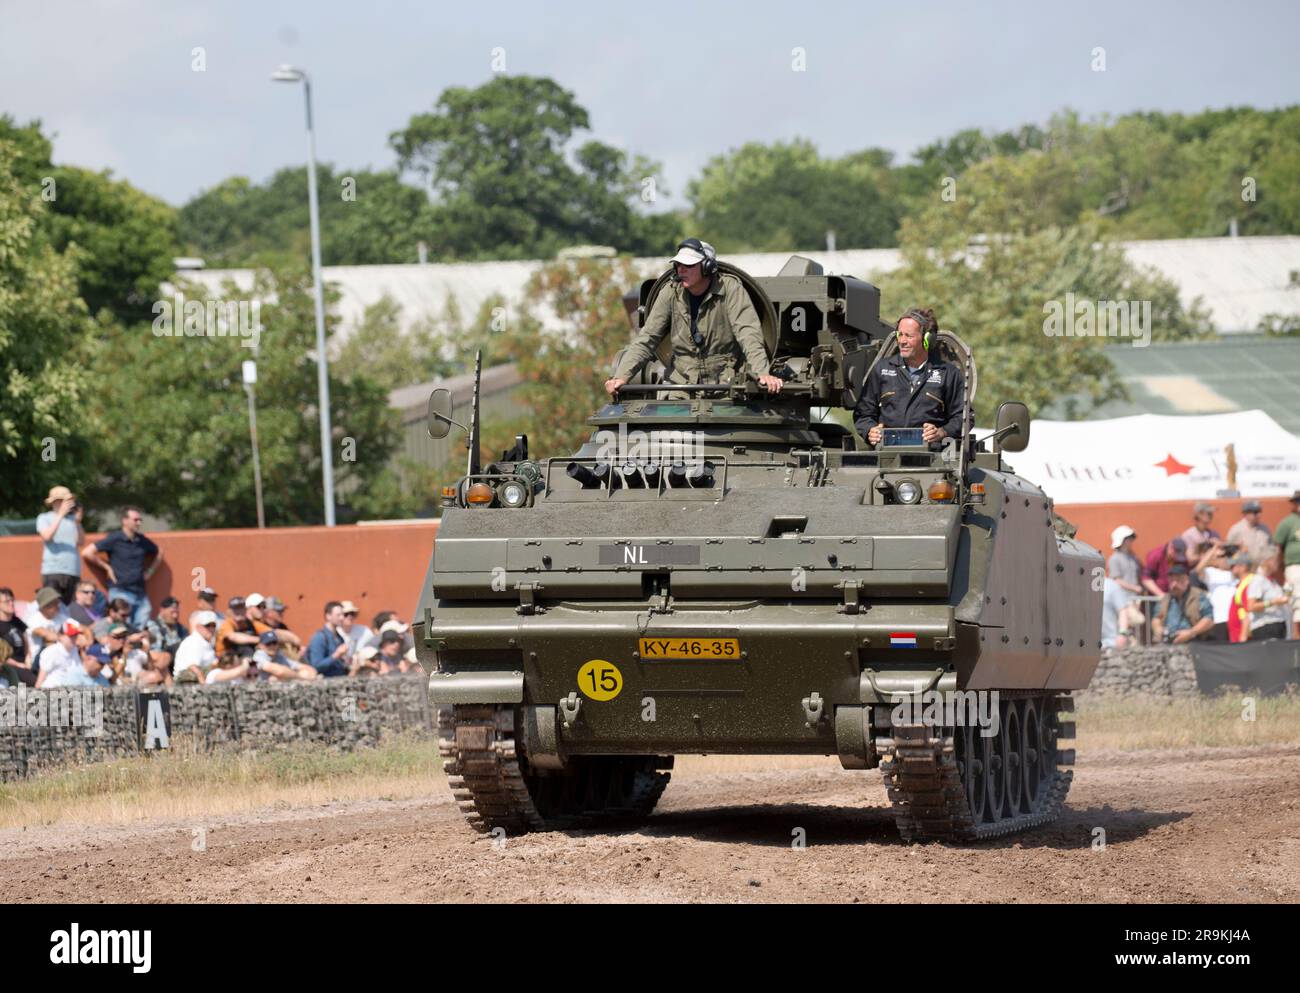 YPR-765 PRAT anti-tank vehicle equipped with a twin-TOW missile launcher by Emerson. The launcher is stowed, reduce its height. Tankfest 23 Bovington Stock Photo